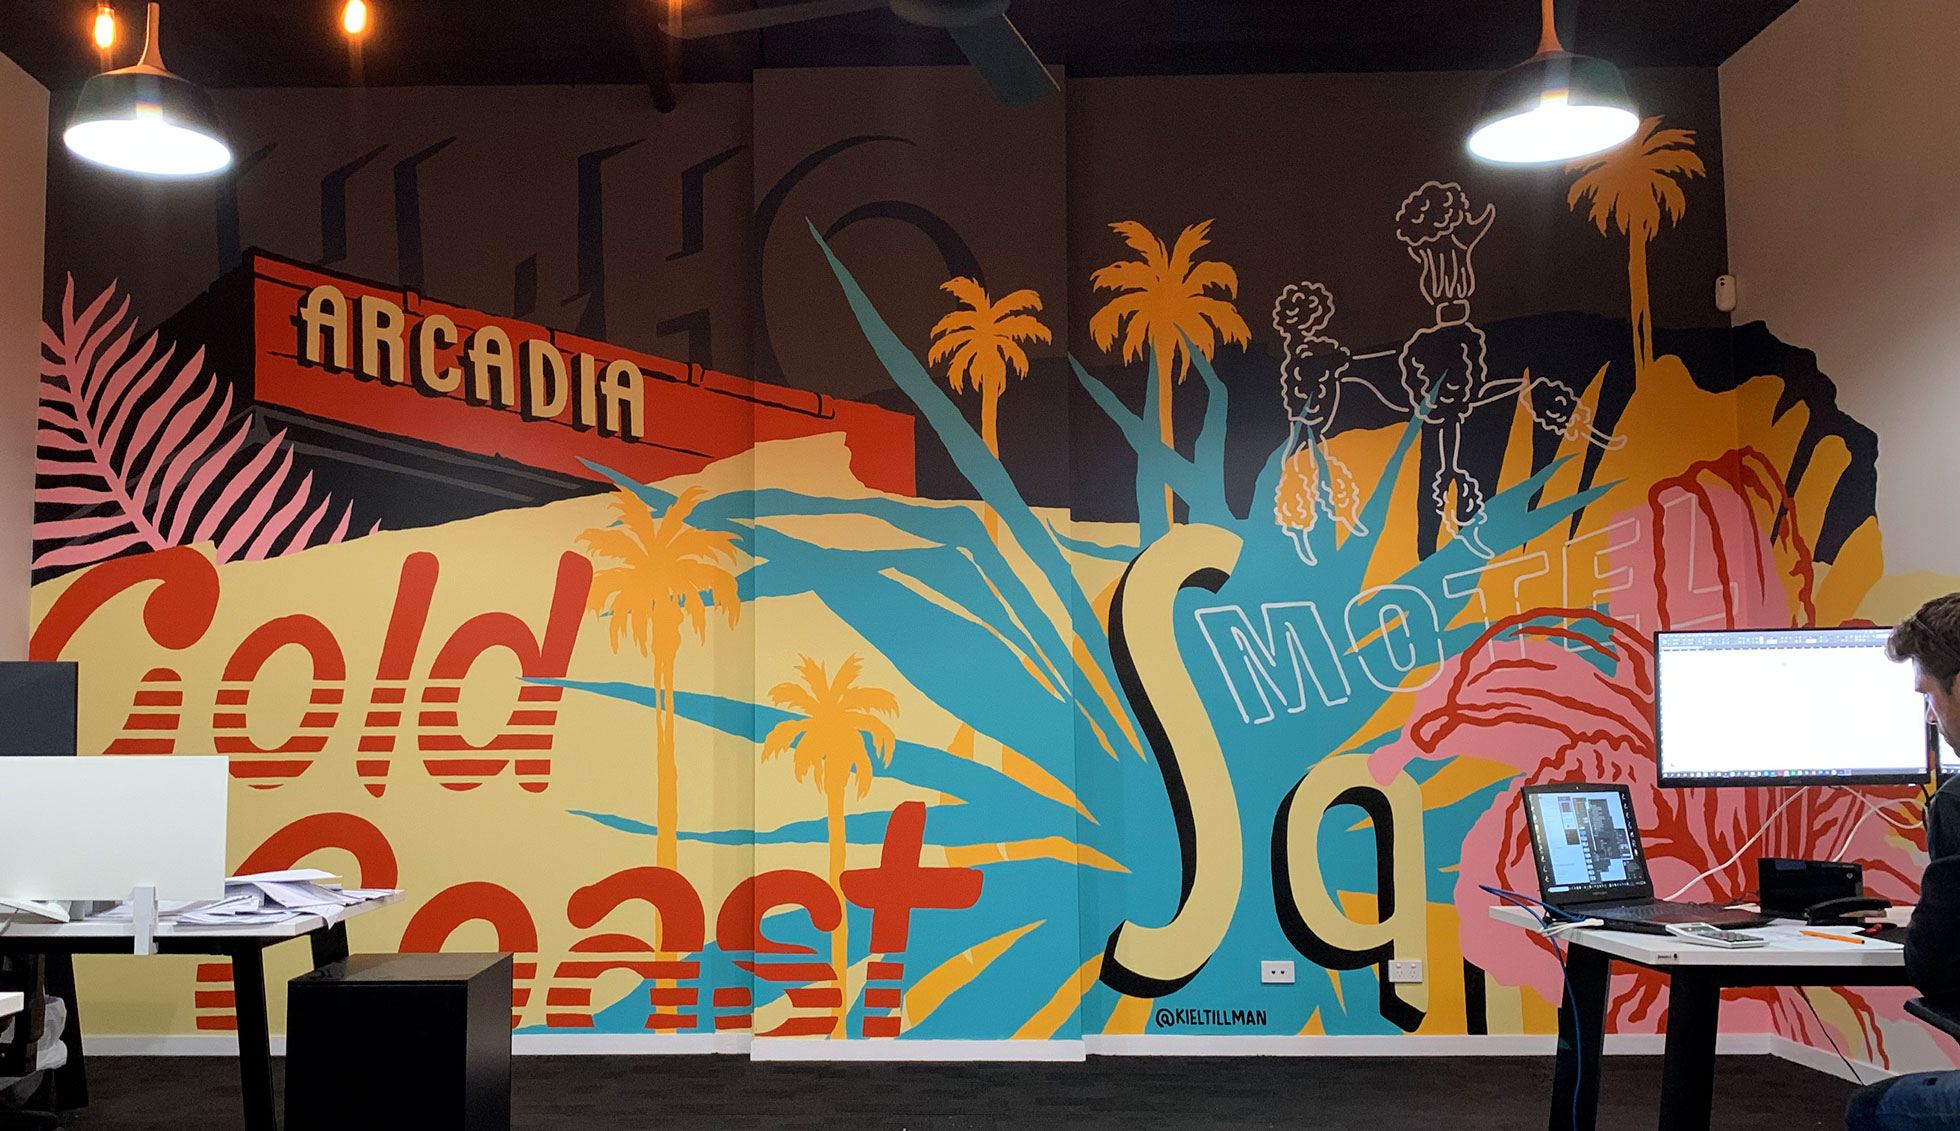 A finished mural piece on an office wall featuring typography and tropical imagery